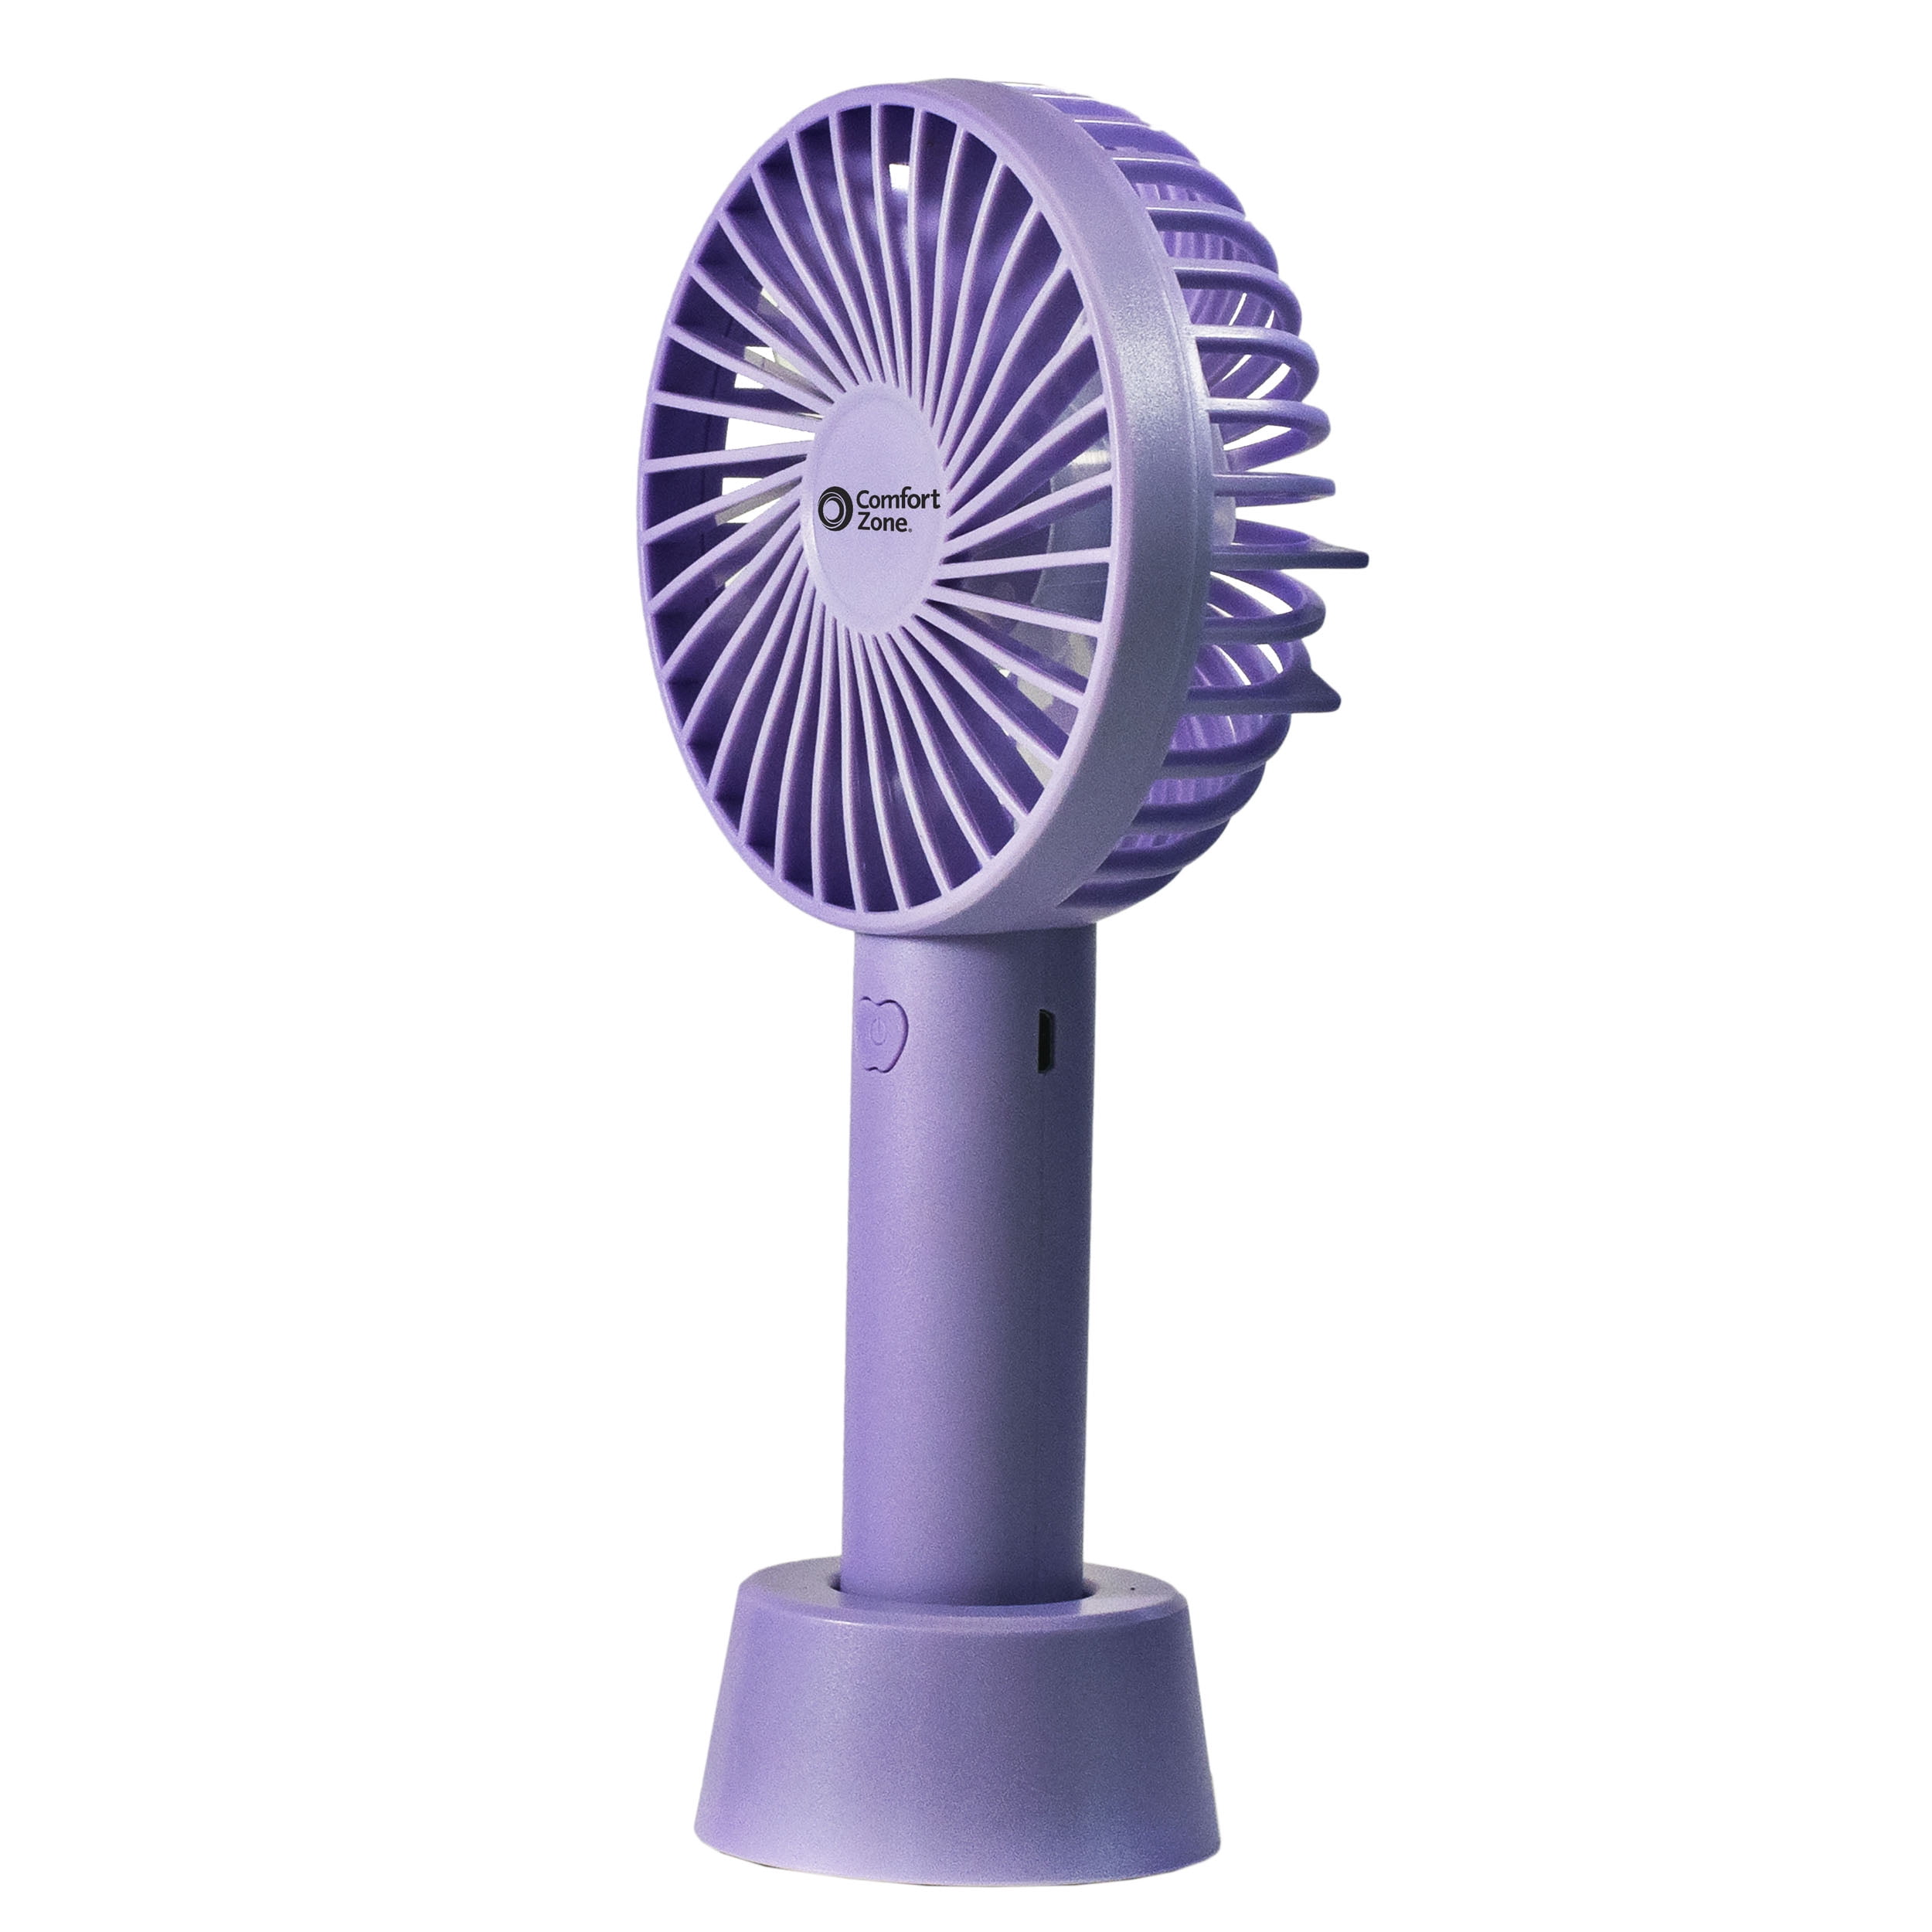 Comfort Zone Handheld Rechargeable Fan Chargeable Lithium Ion Battery